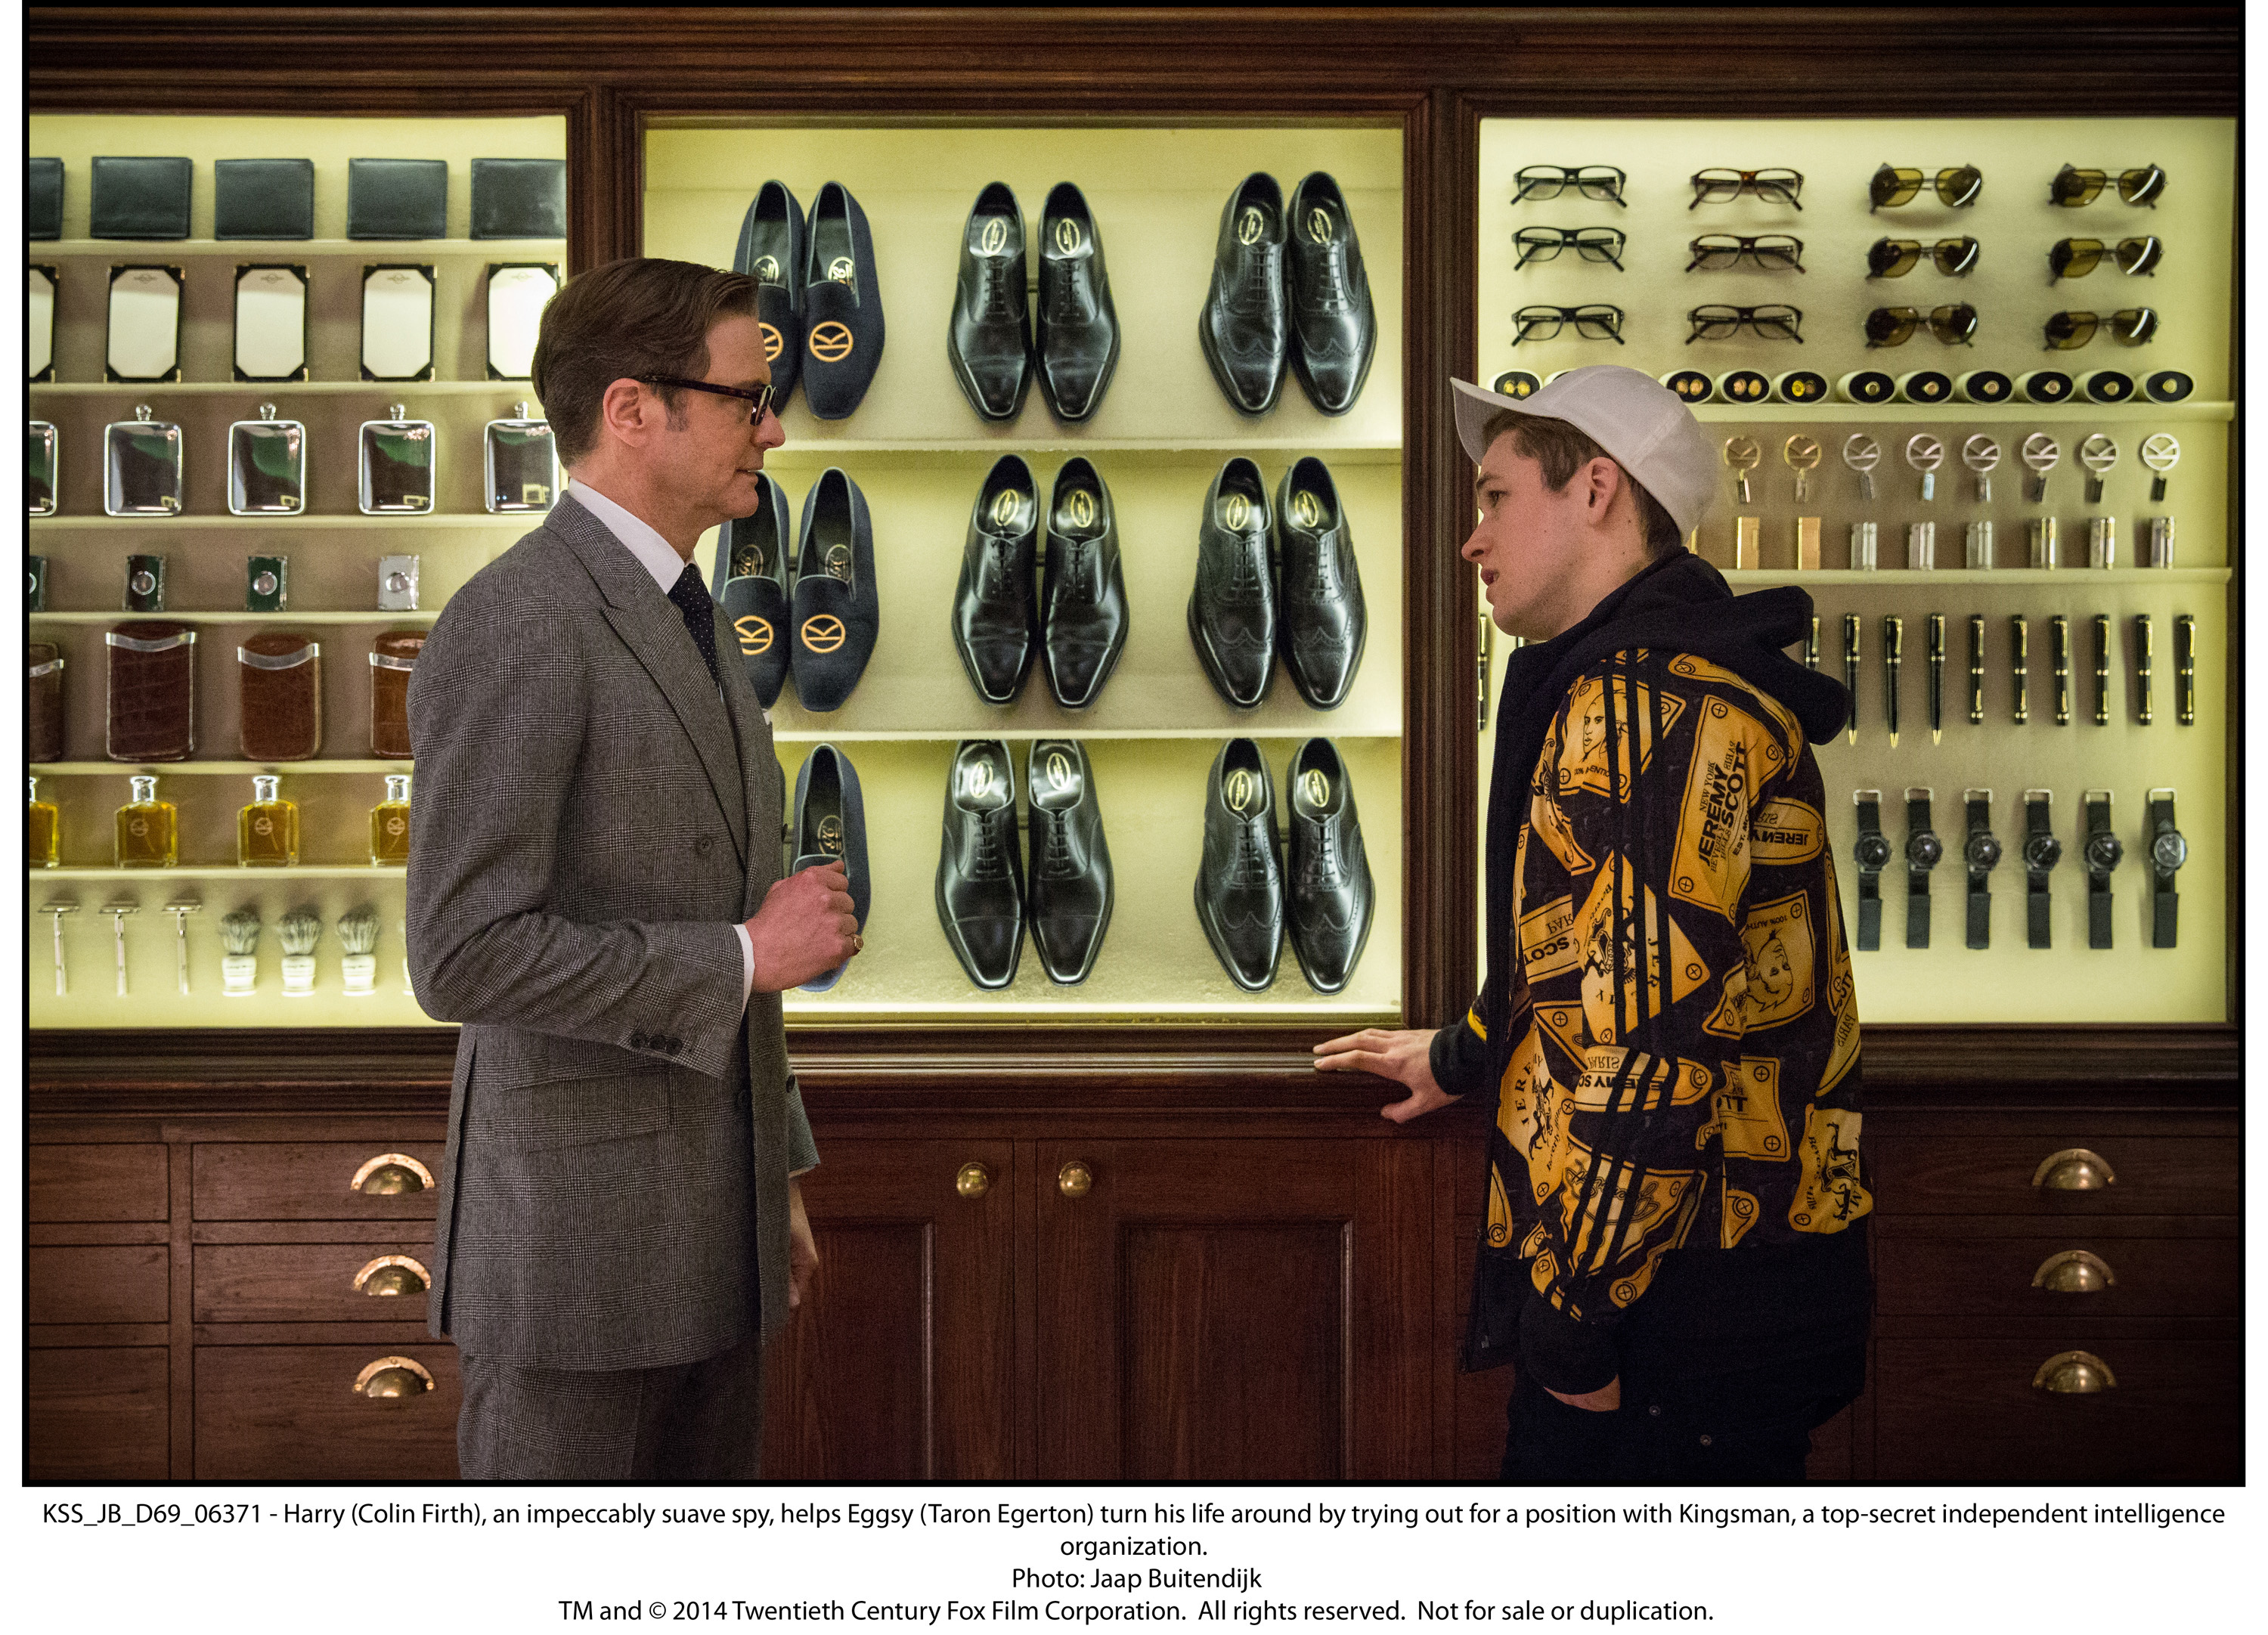 Colin Firth and Taron Egerton in Kingsman: The Secret Service (2014)